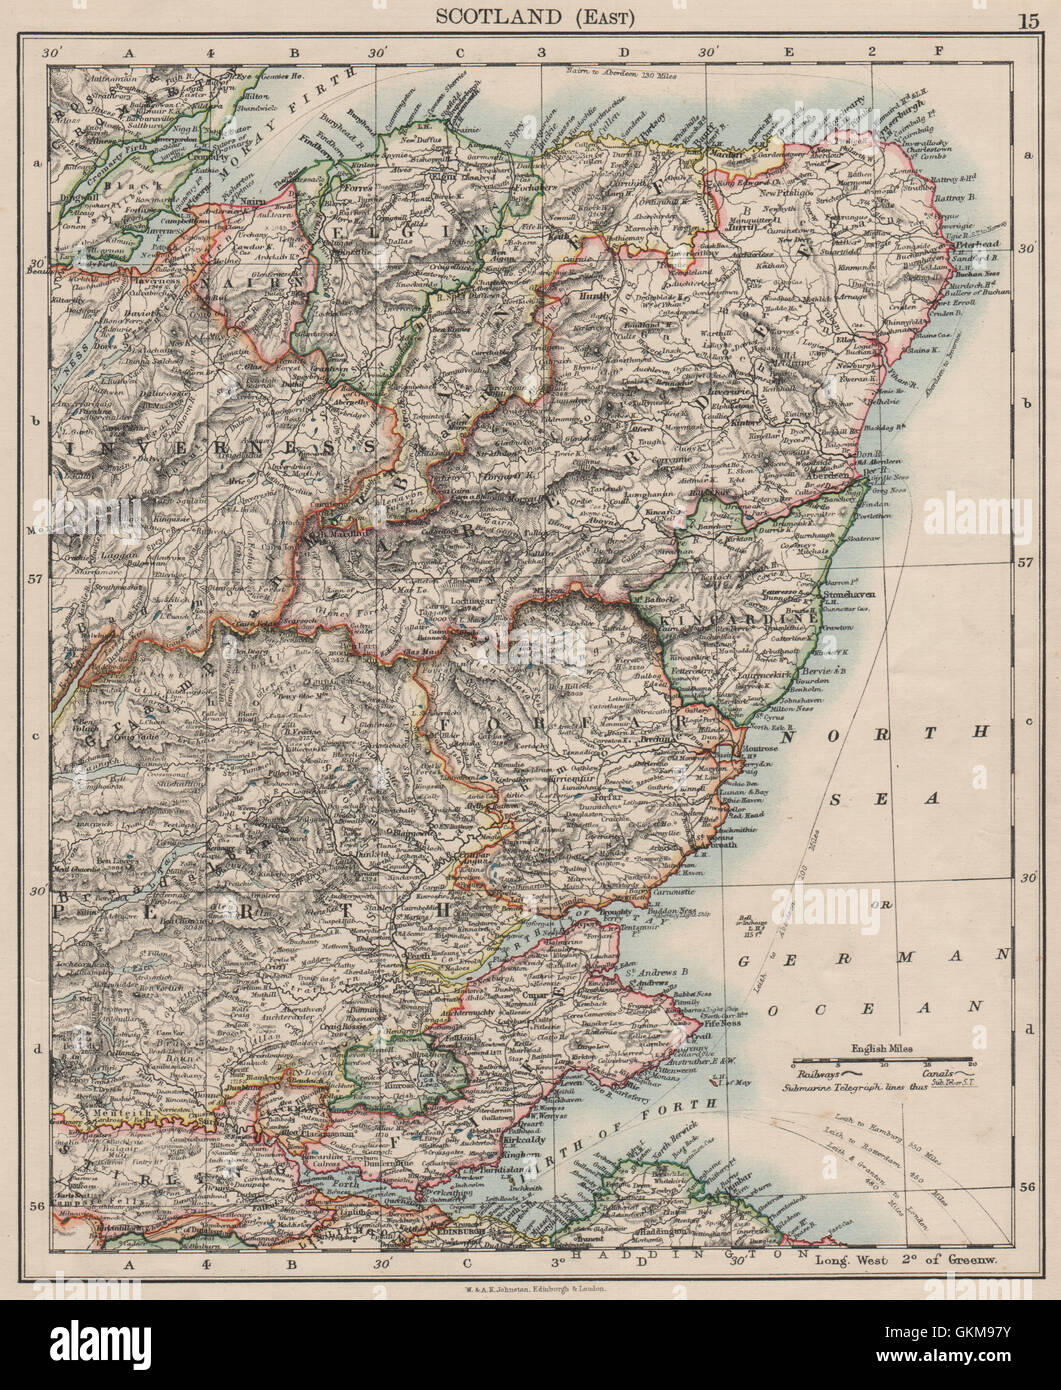 SCOTLAND EAST. Grampian Tayside Fife Firth of Forth Aberdeen.JOHNSTON, 1900 map Stock Photo